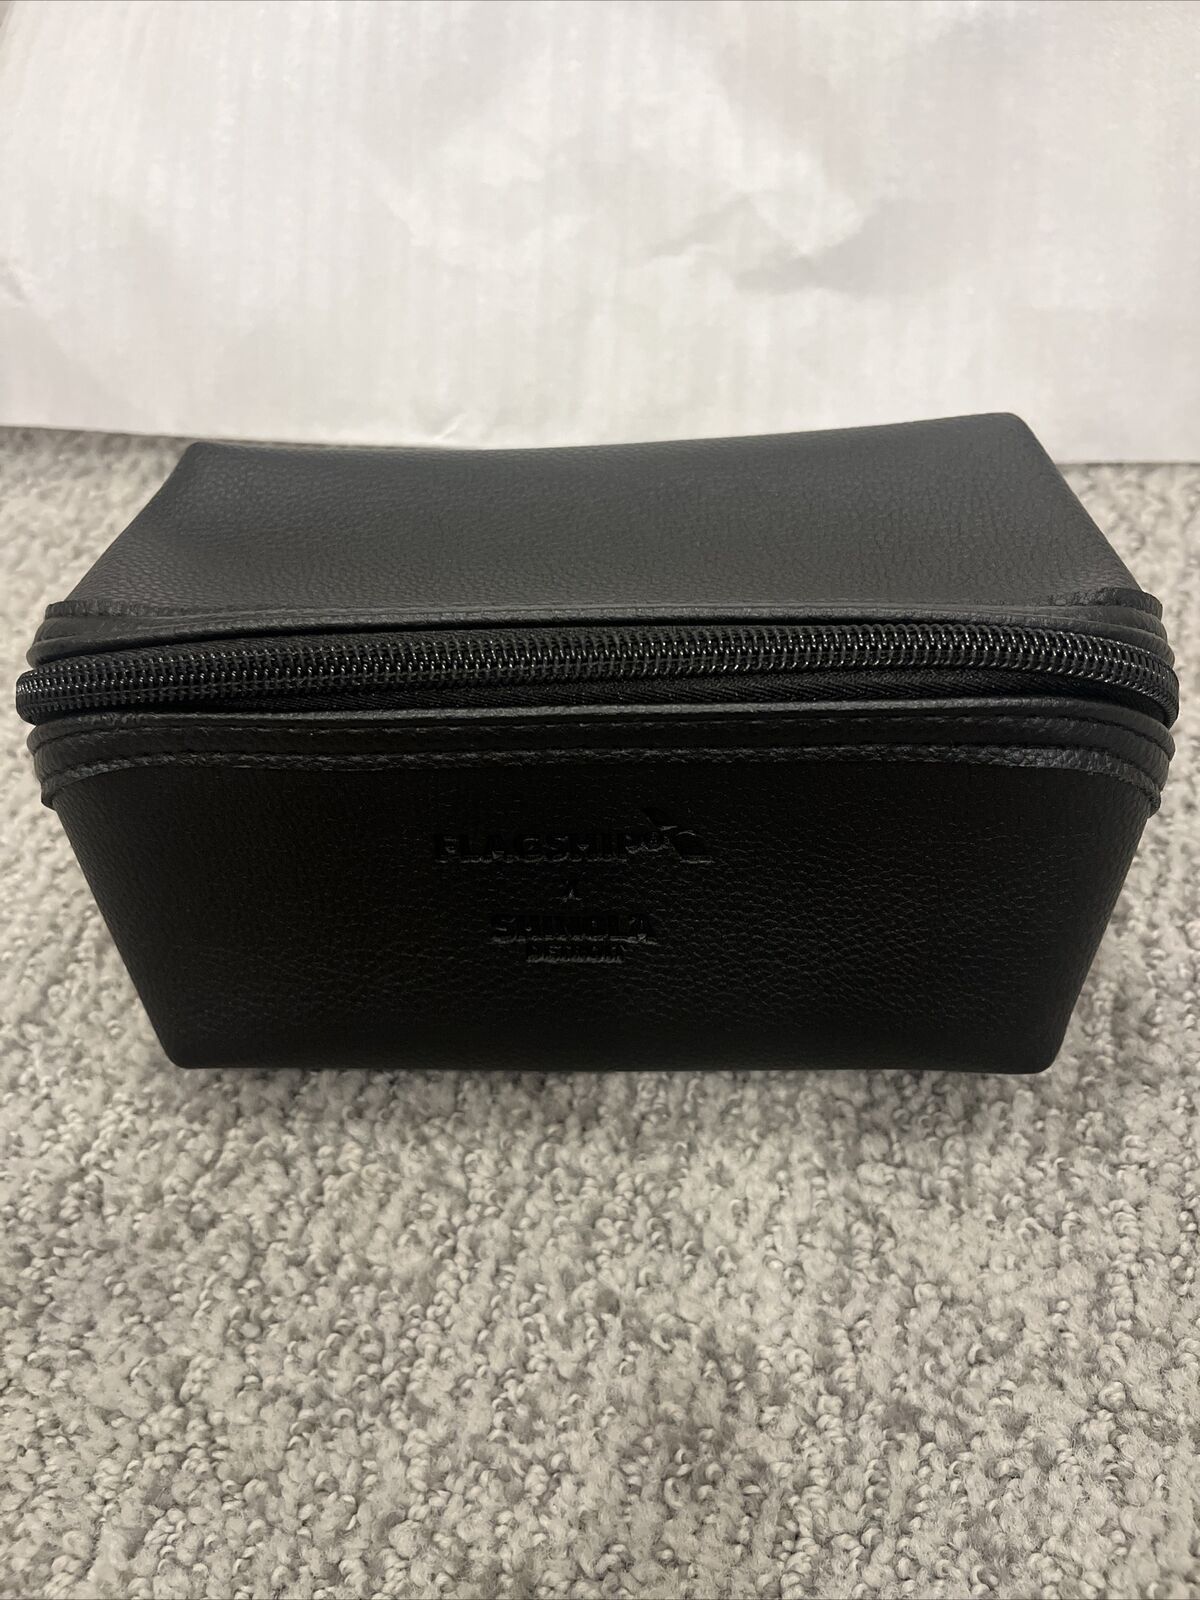 American Airlines Shinola Detroit Flagship Black First Class Amenity Kit - NEW